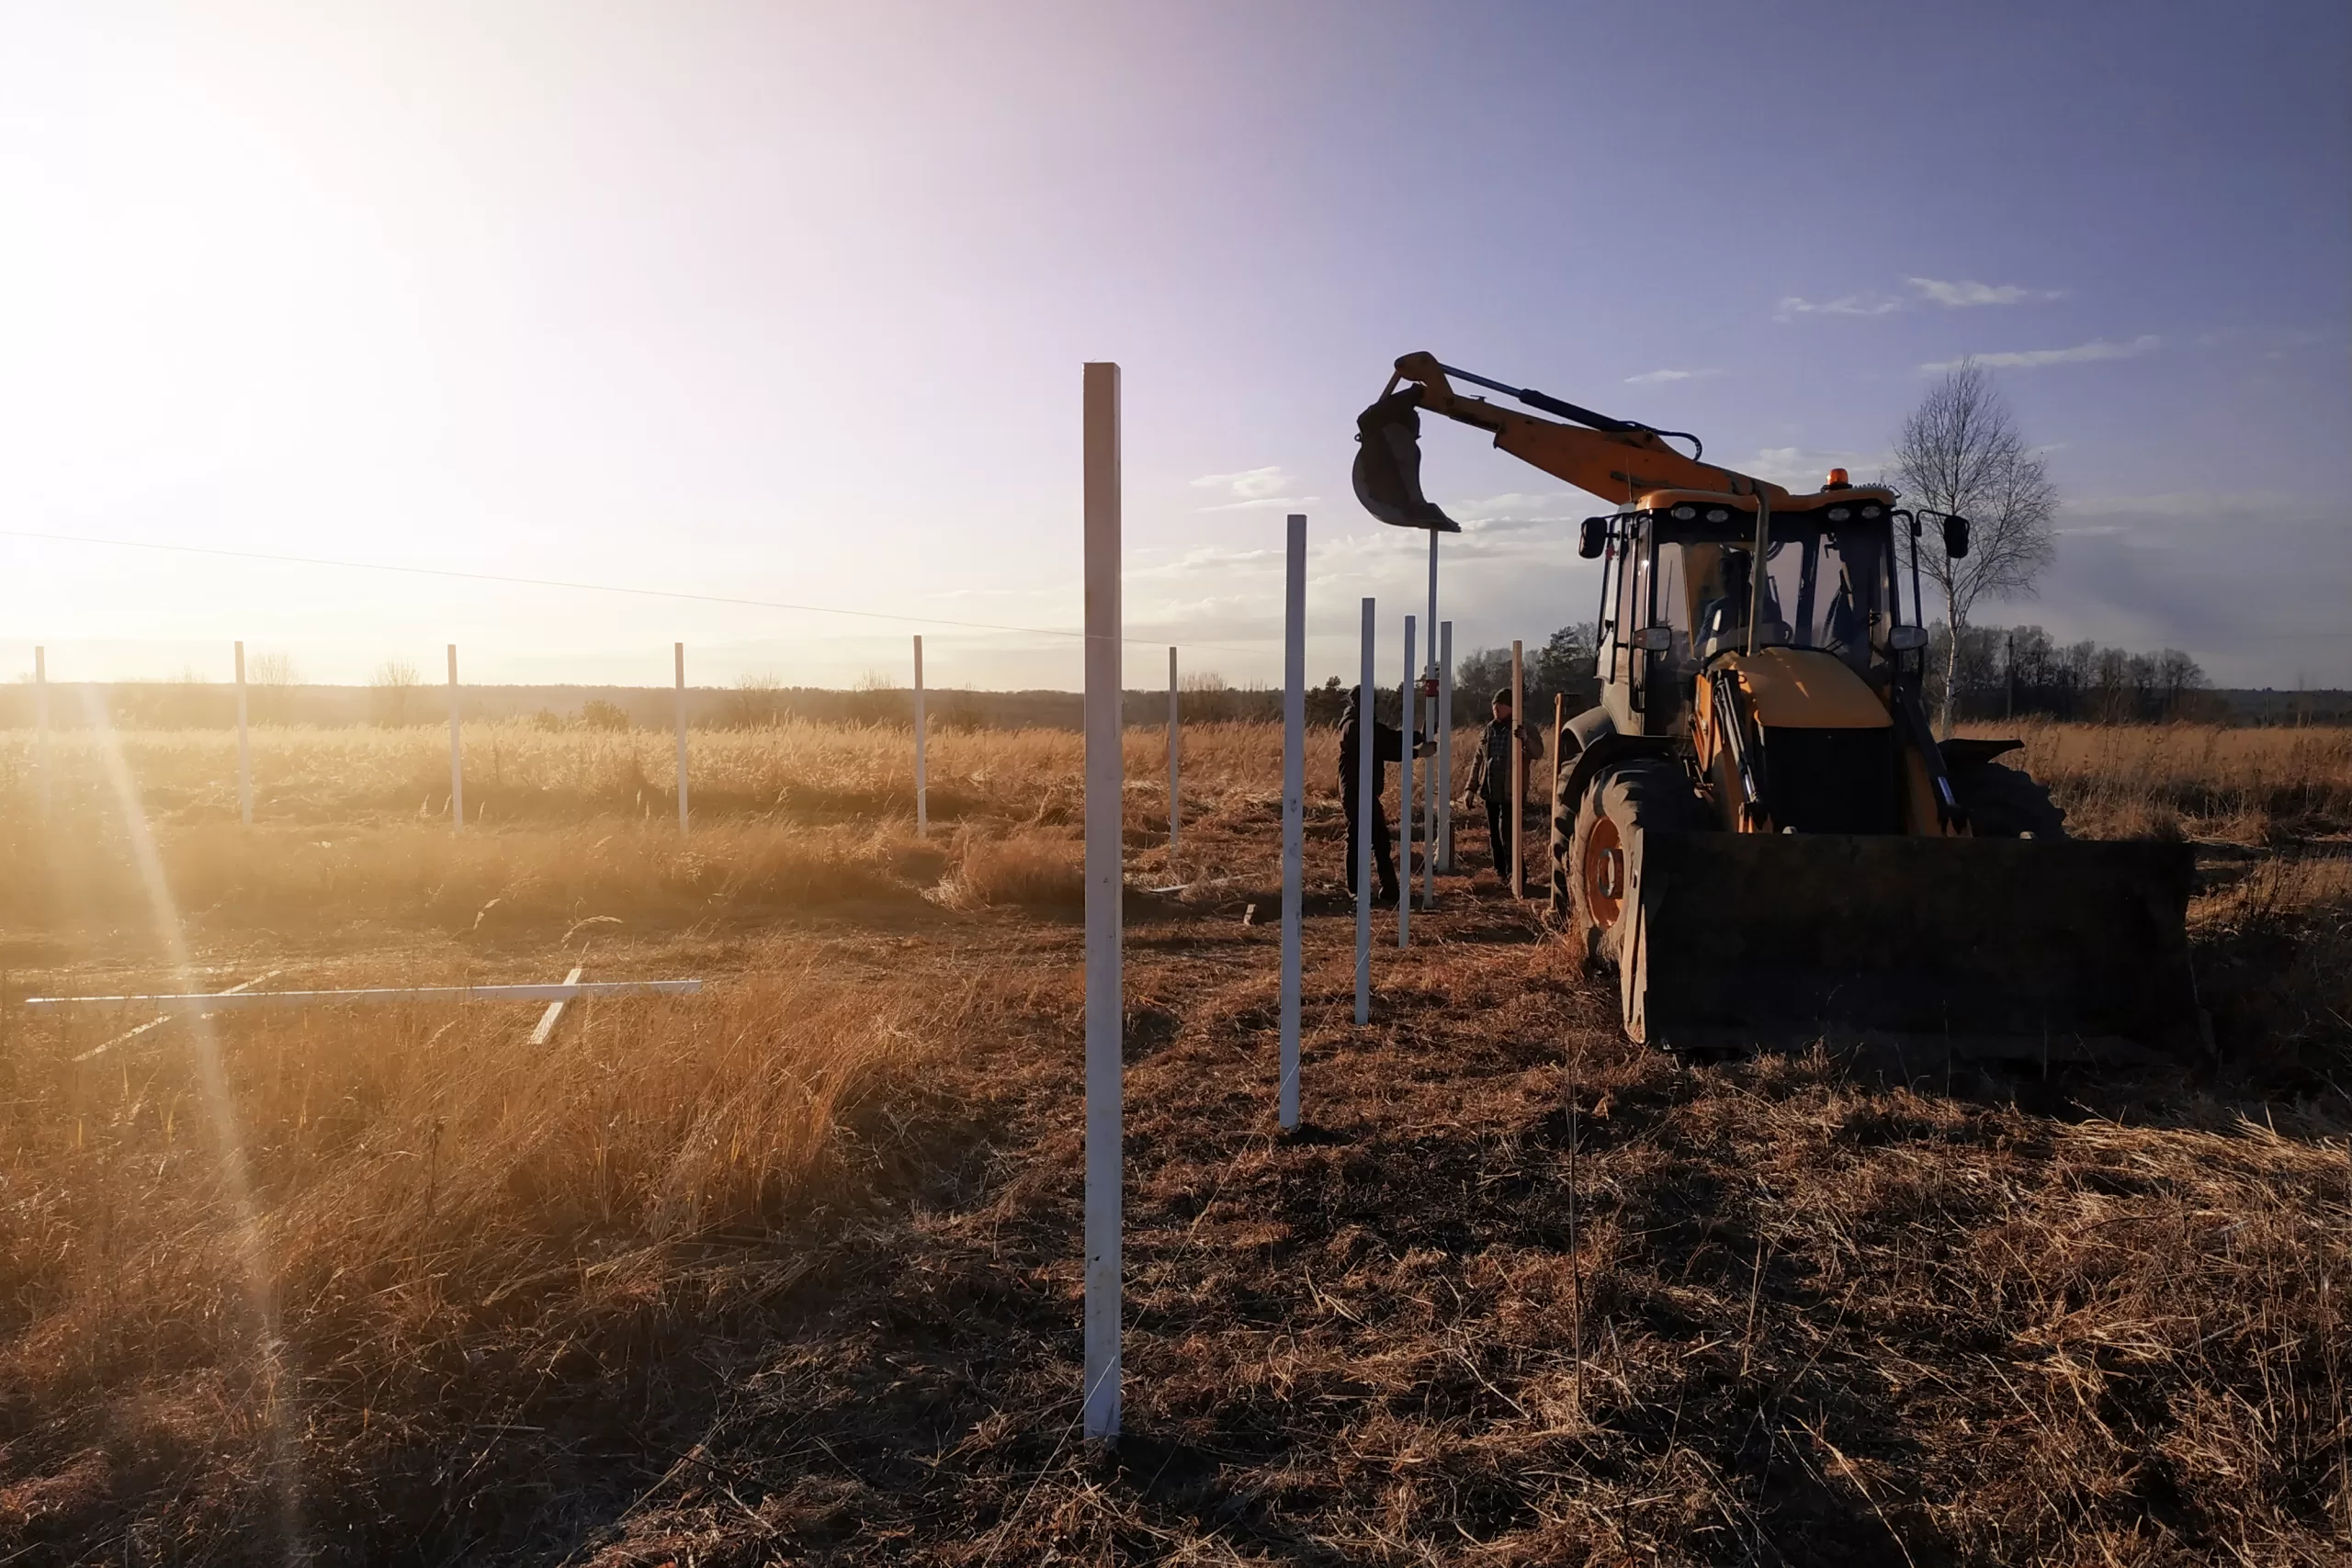 a backhoe assisting in building a fence out in the country at dusk